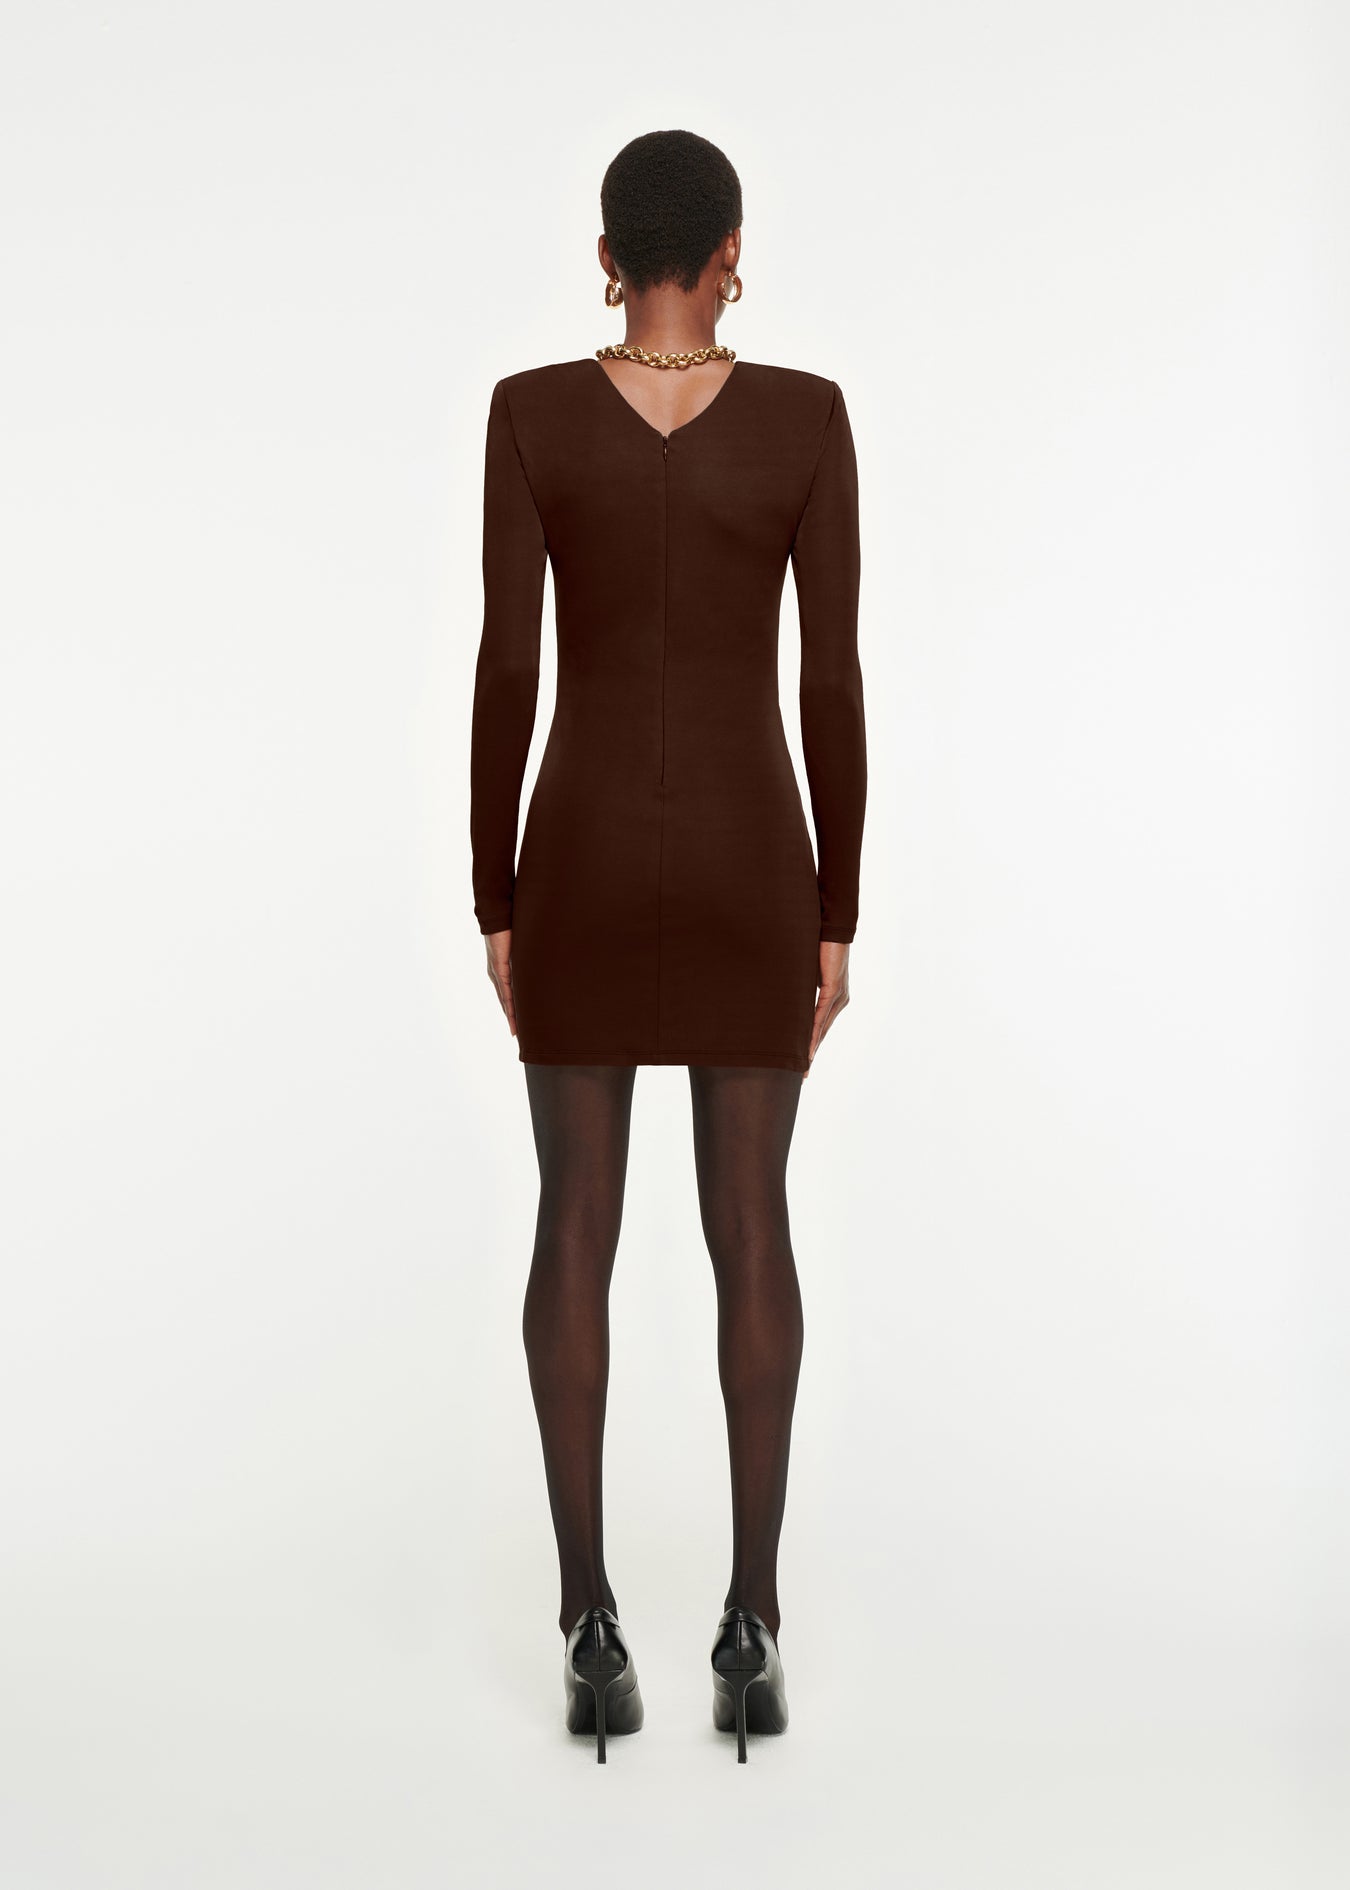 The back of a woman wearing the Long Sleeve Jersey Mini Dress in Brown